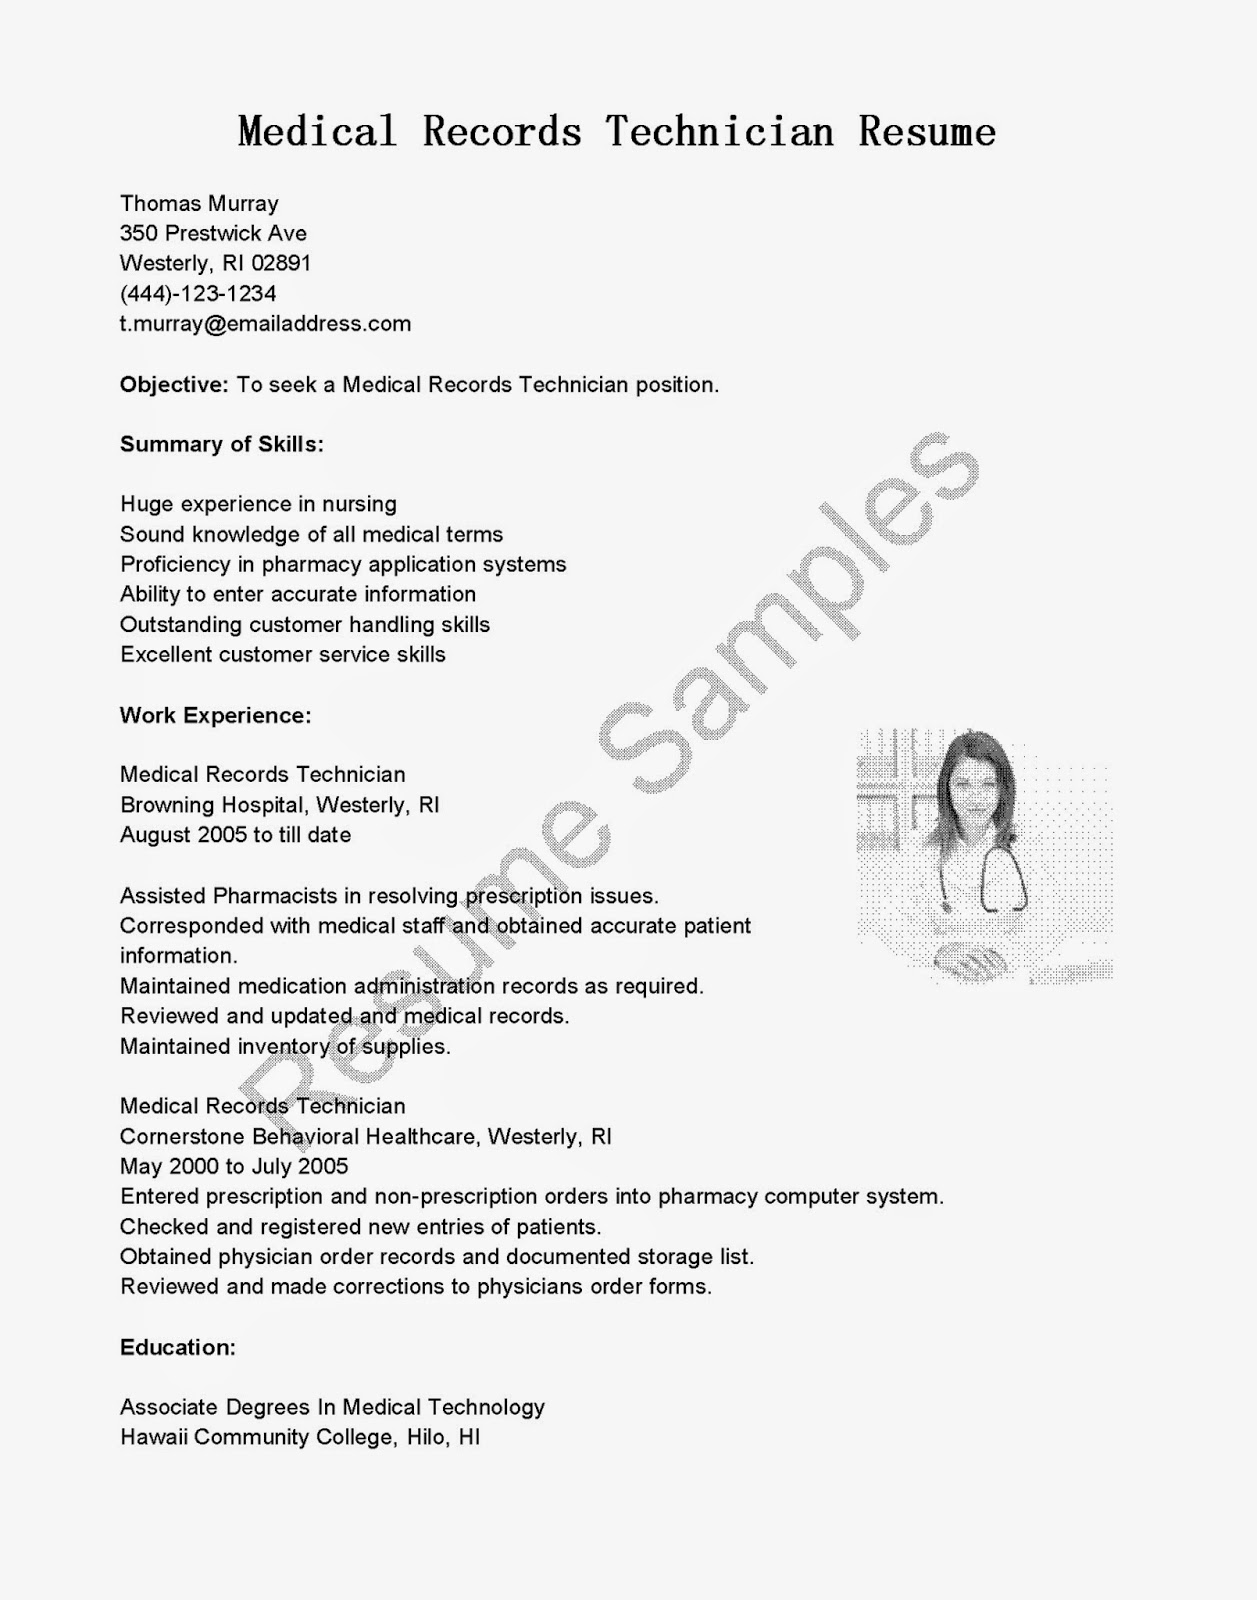 Conductor resume